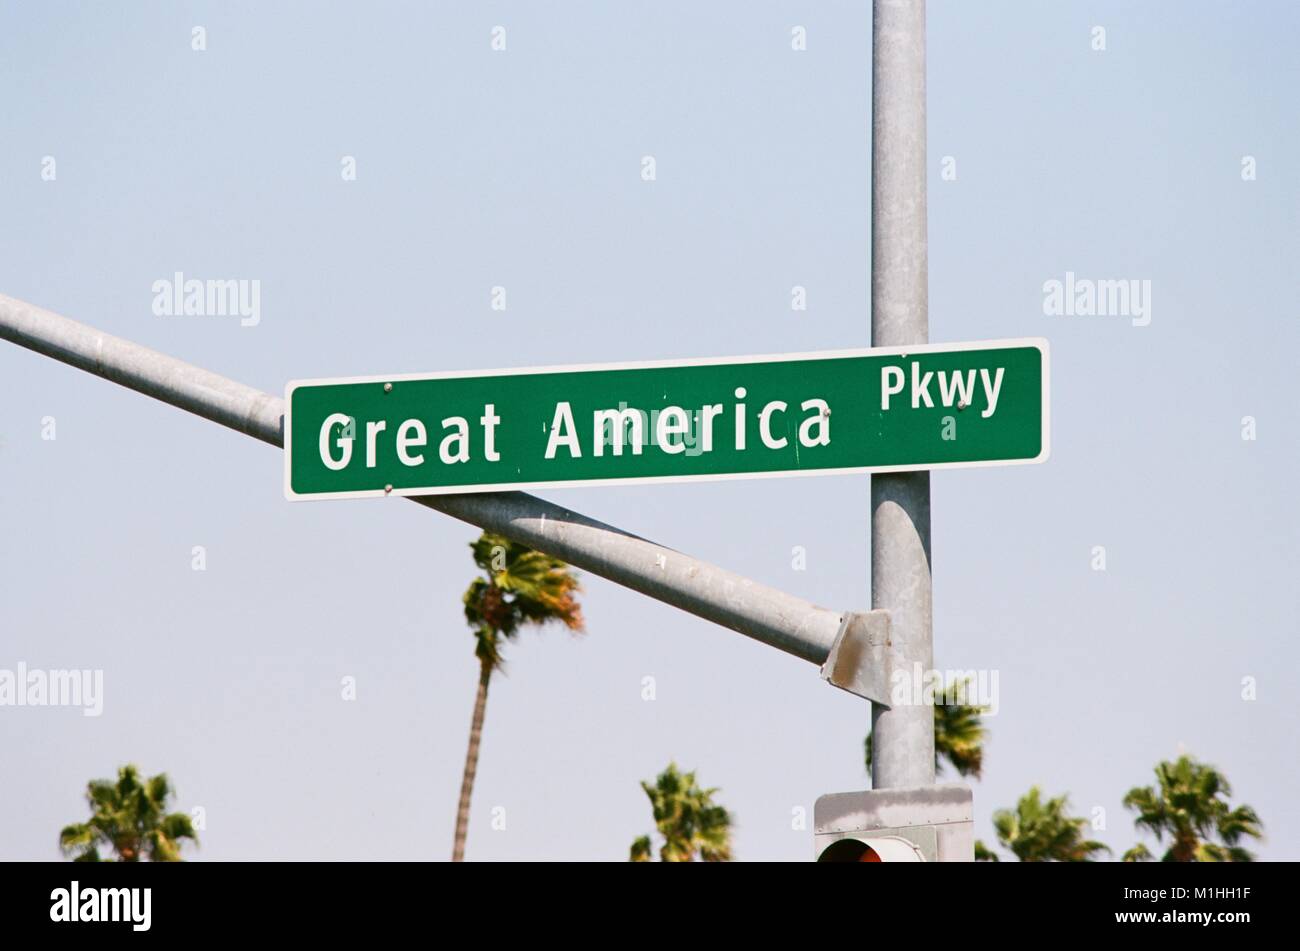 Road sign for Great America Parkway, the main thoroughfare in downtown Santa Clara, California, part of the Silicon Valley, August 17, 2017. () Stock Photo